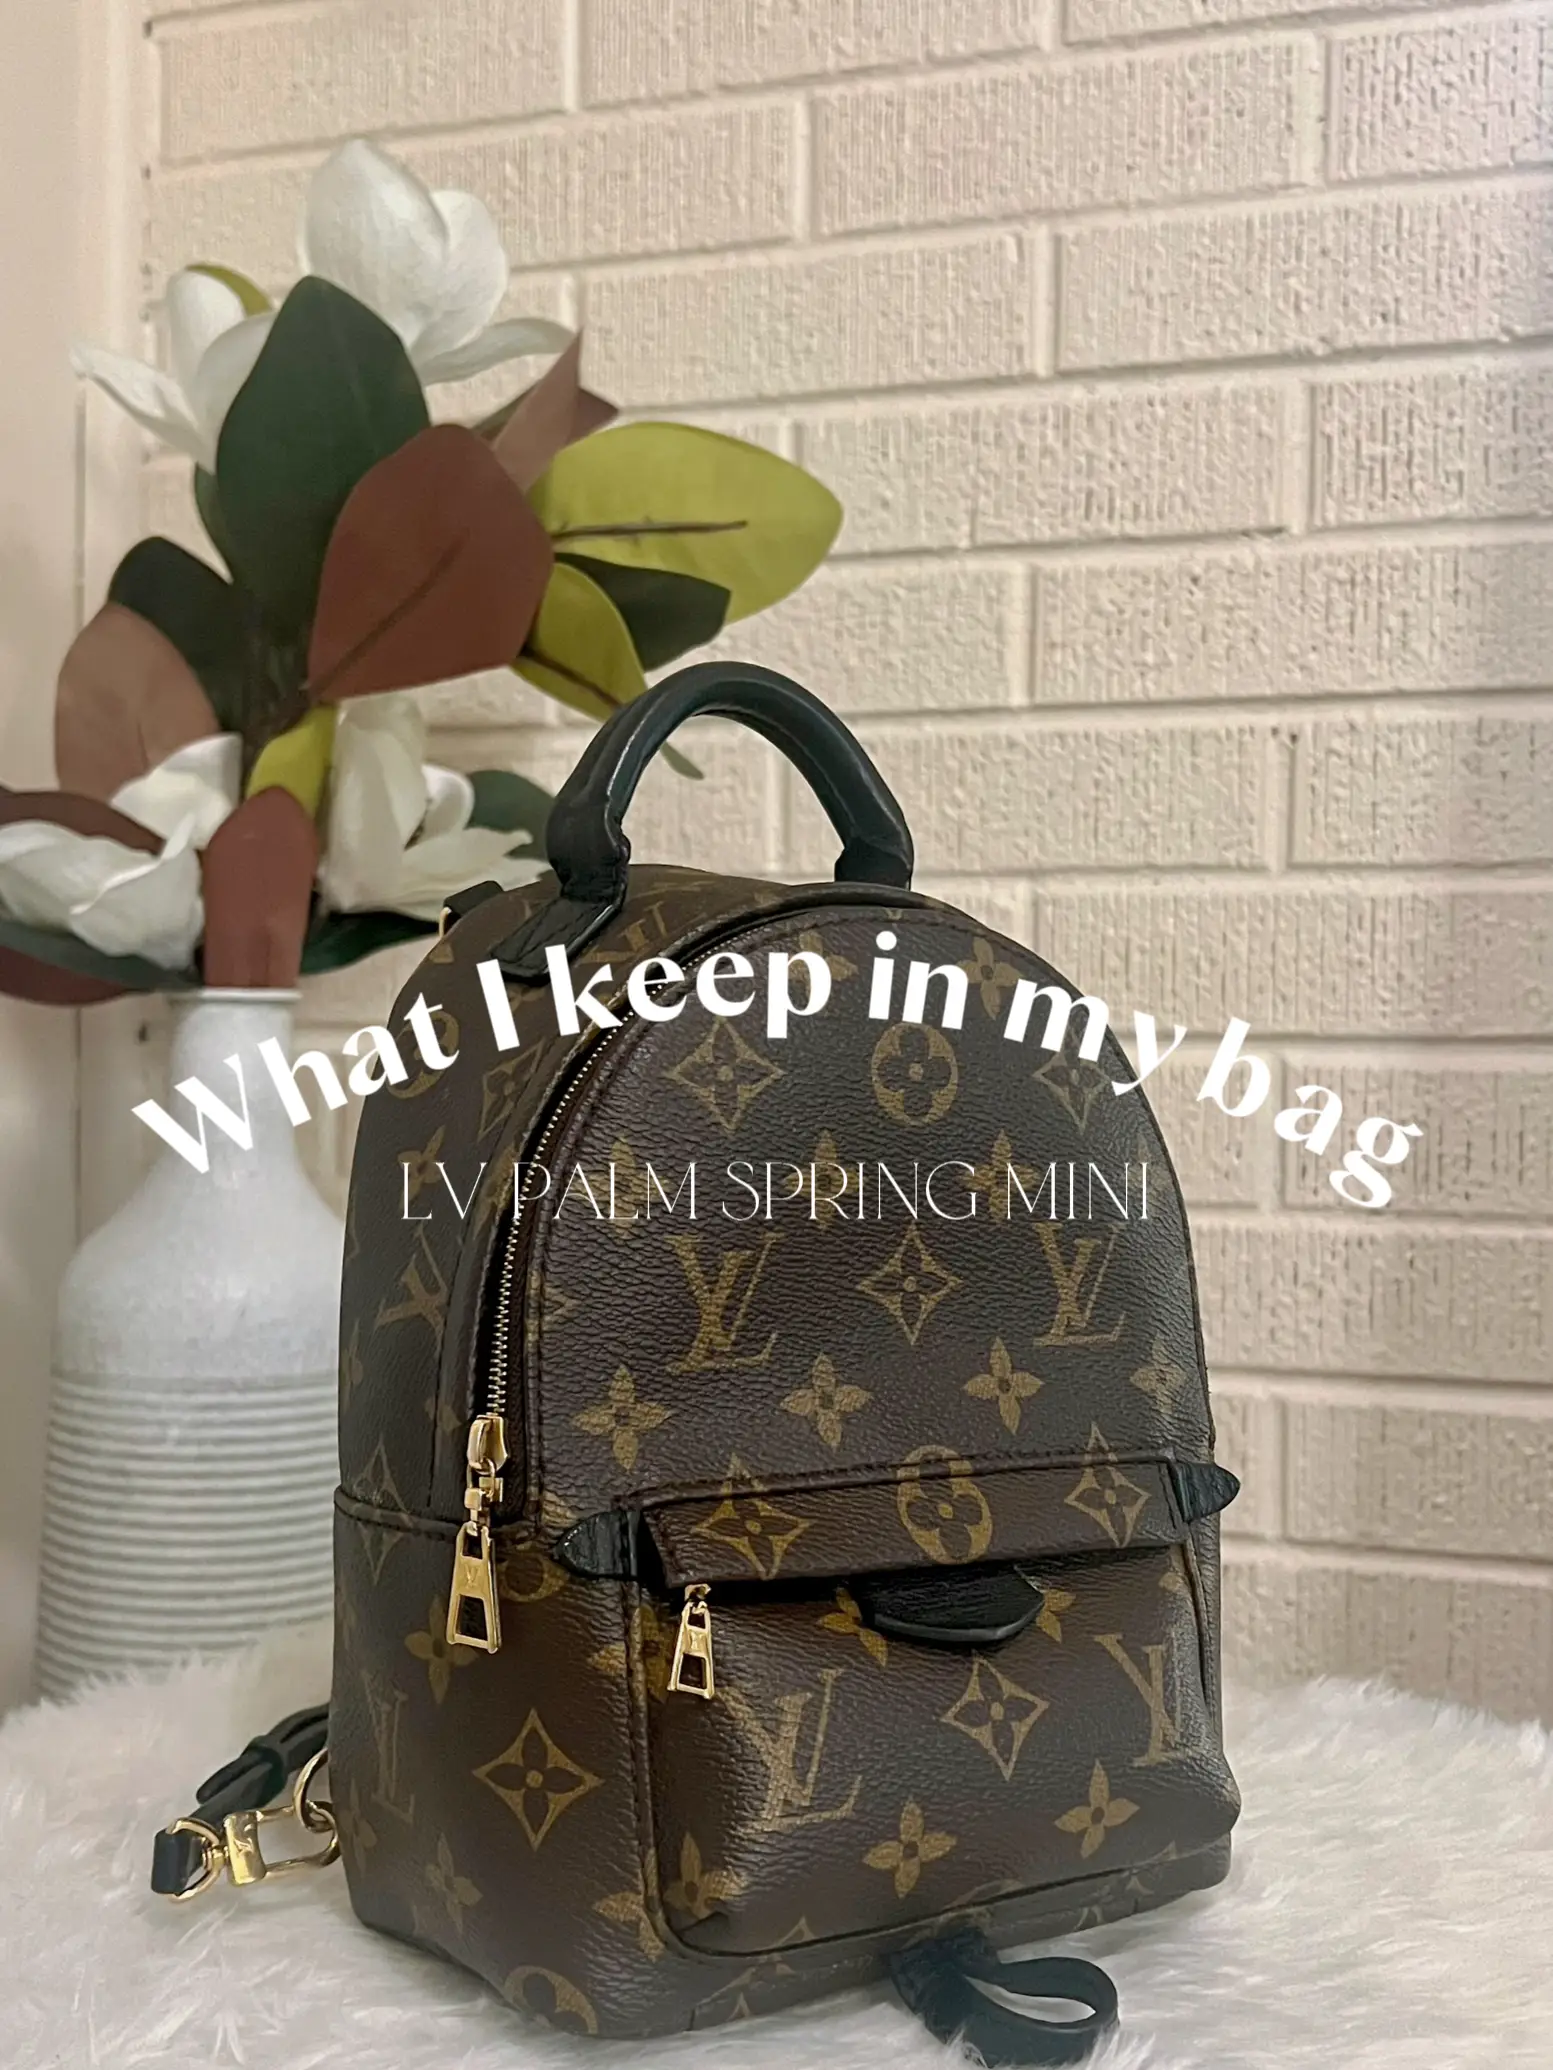 Louis Vuitton - PALM SPRINGS MINI BACKPACK - first impressions, review and  what fits/WIMB 